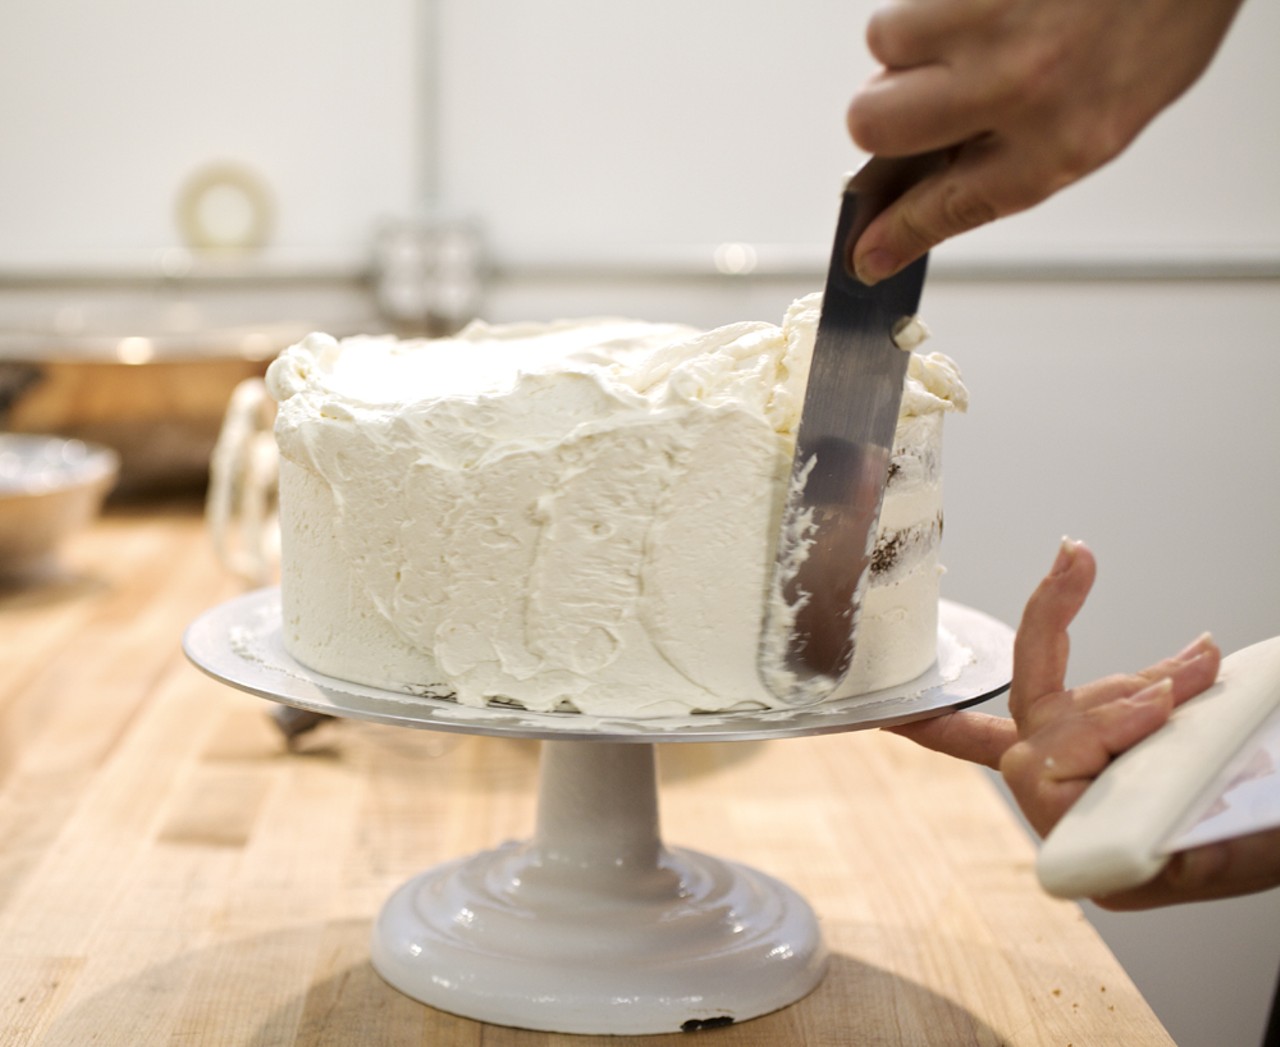 Bittersweet owner Leanna Russo applies icing to a Vanilla Bean Buttermilk cake in the kitchen at Bittersweet.